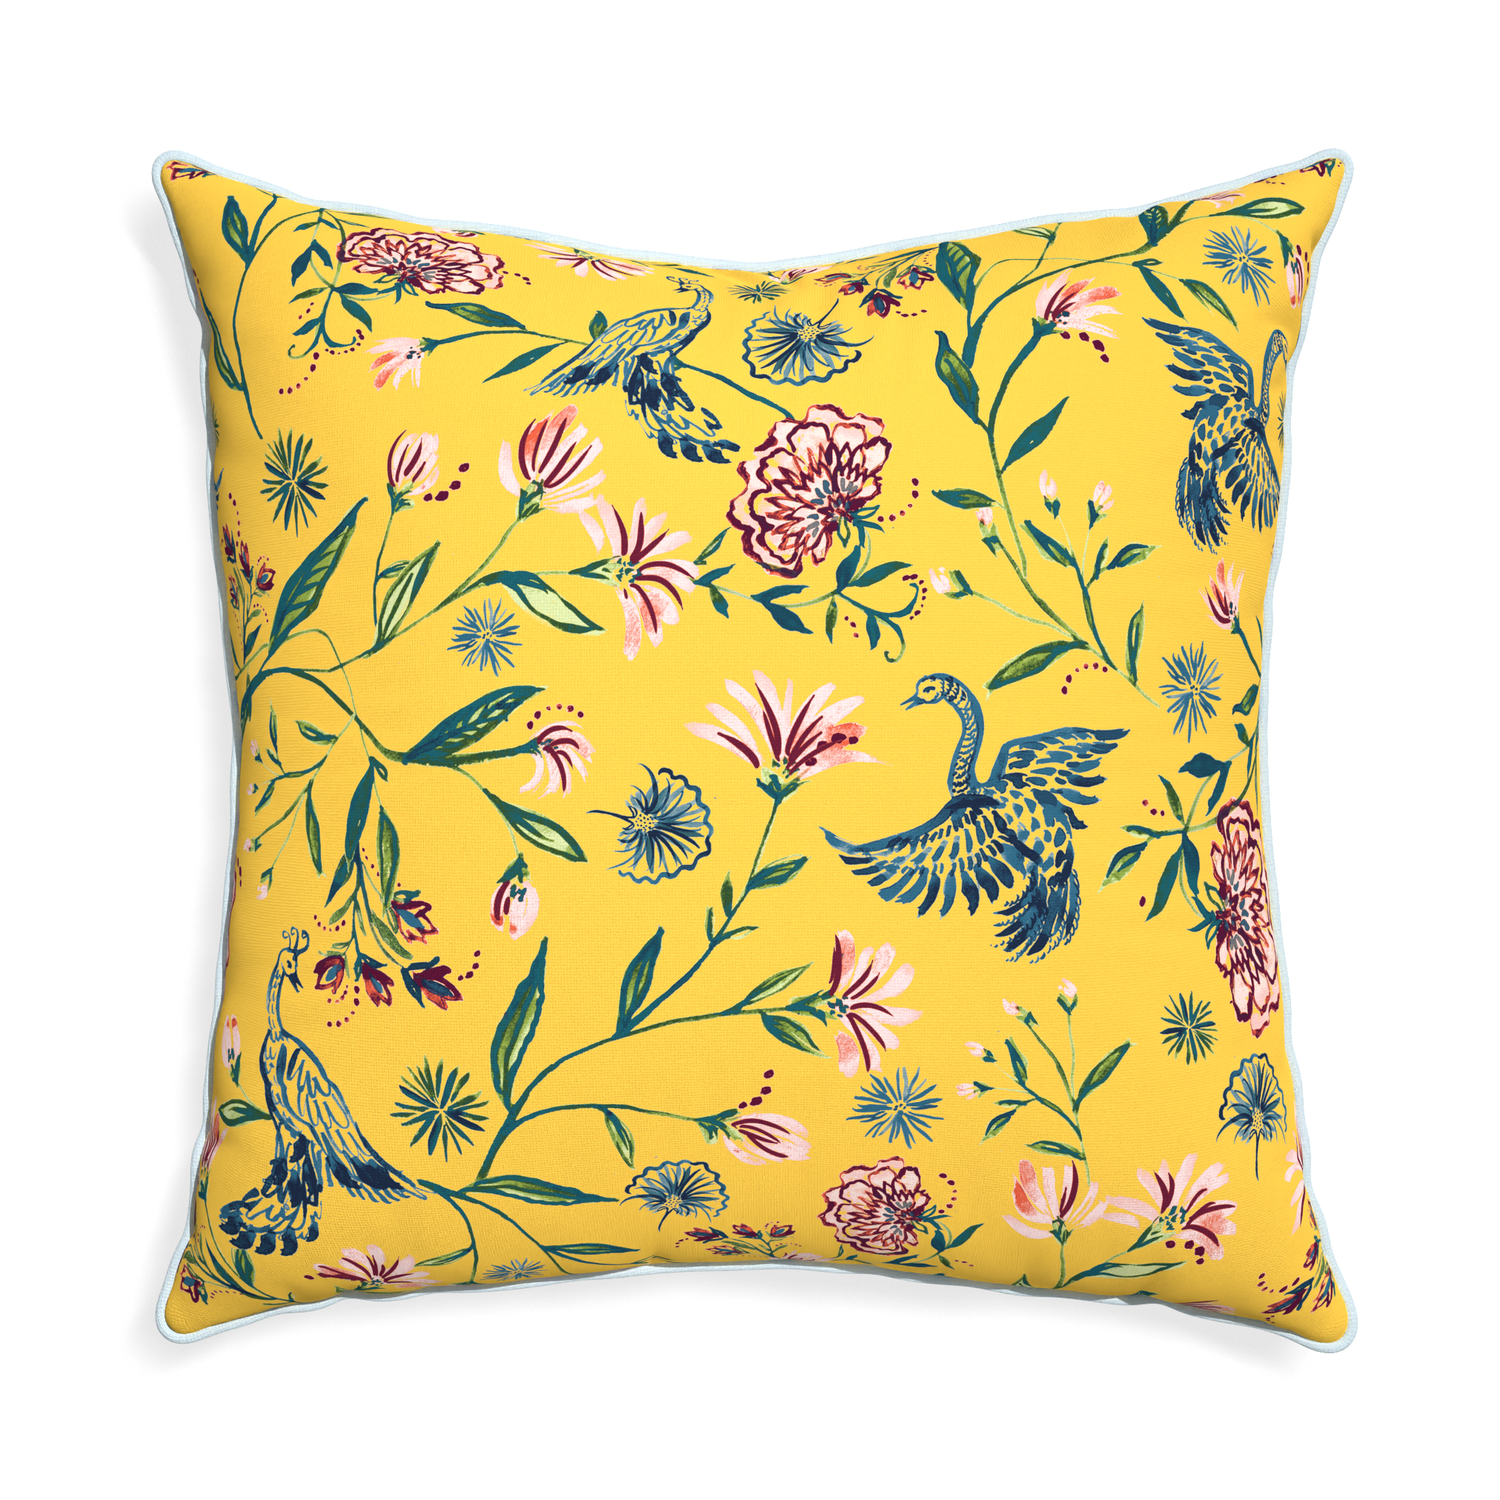 Euro-sham daphne canary custom pillow with powder piping on white background